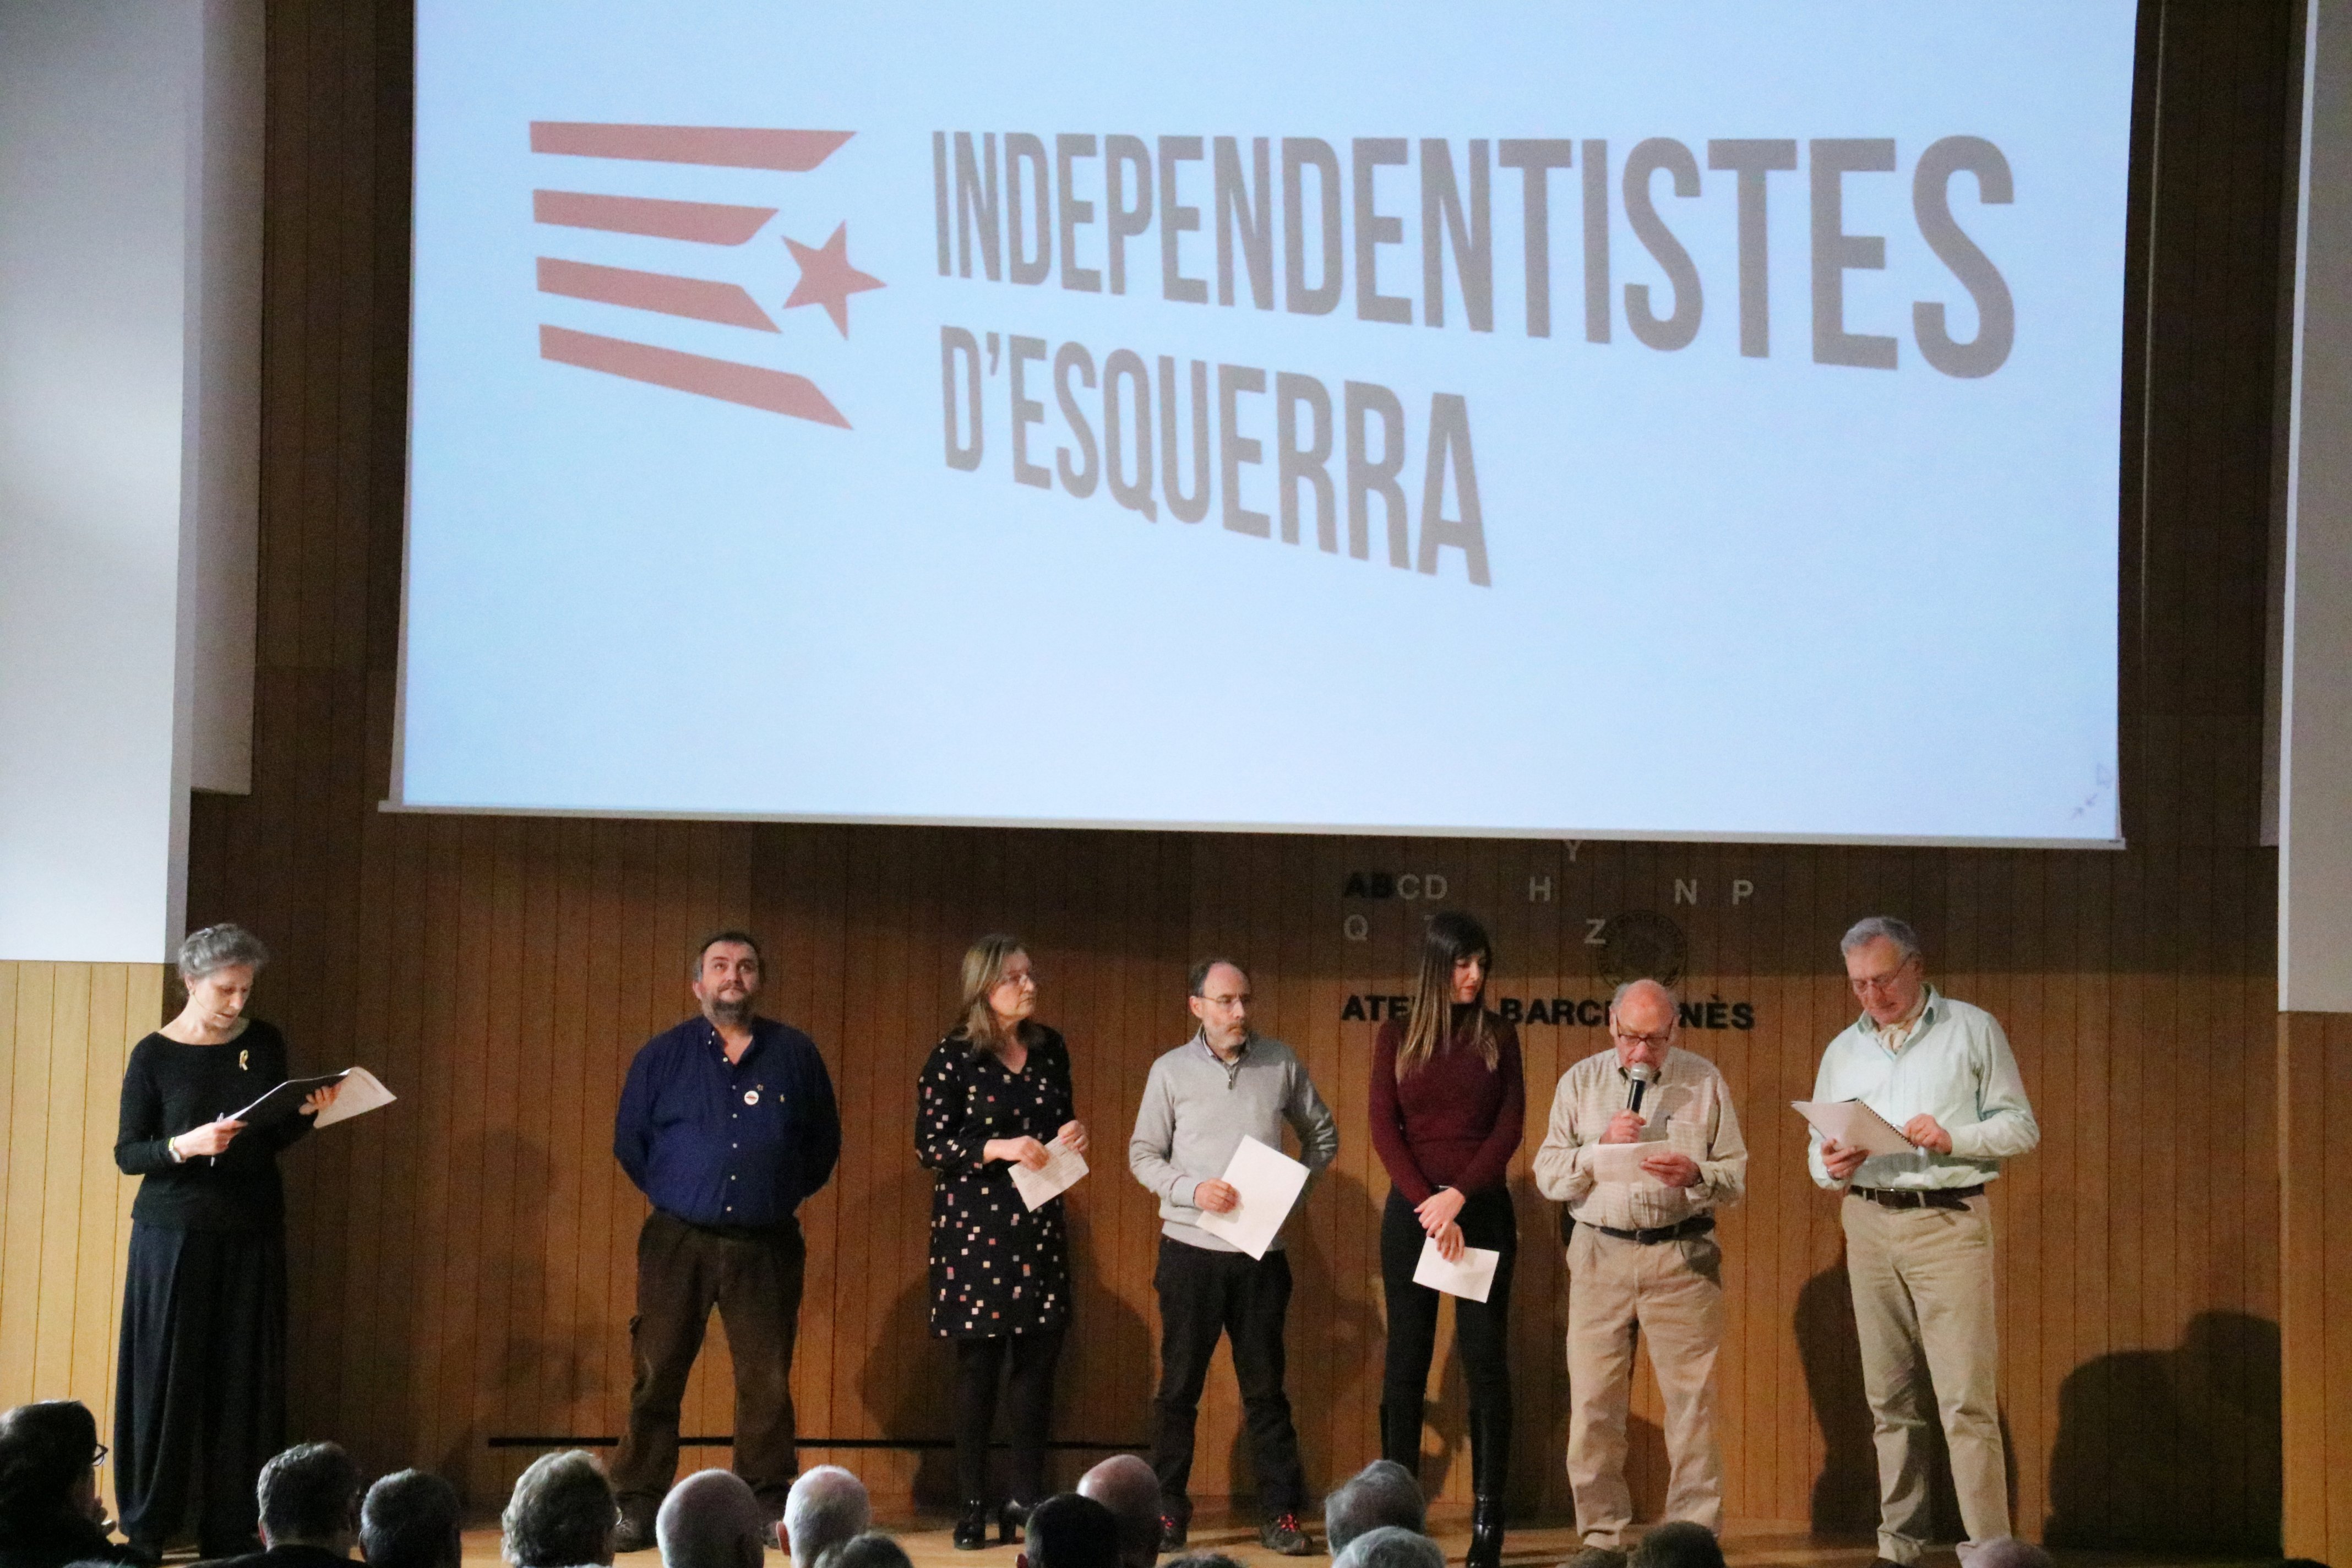 New left-wing pro-independence group for “strategic unity”: Independentistes d’Esquerra